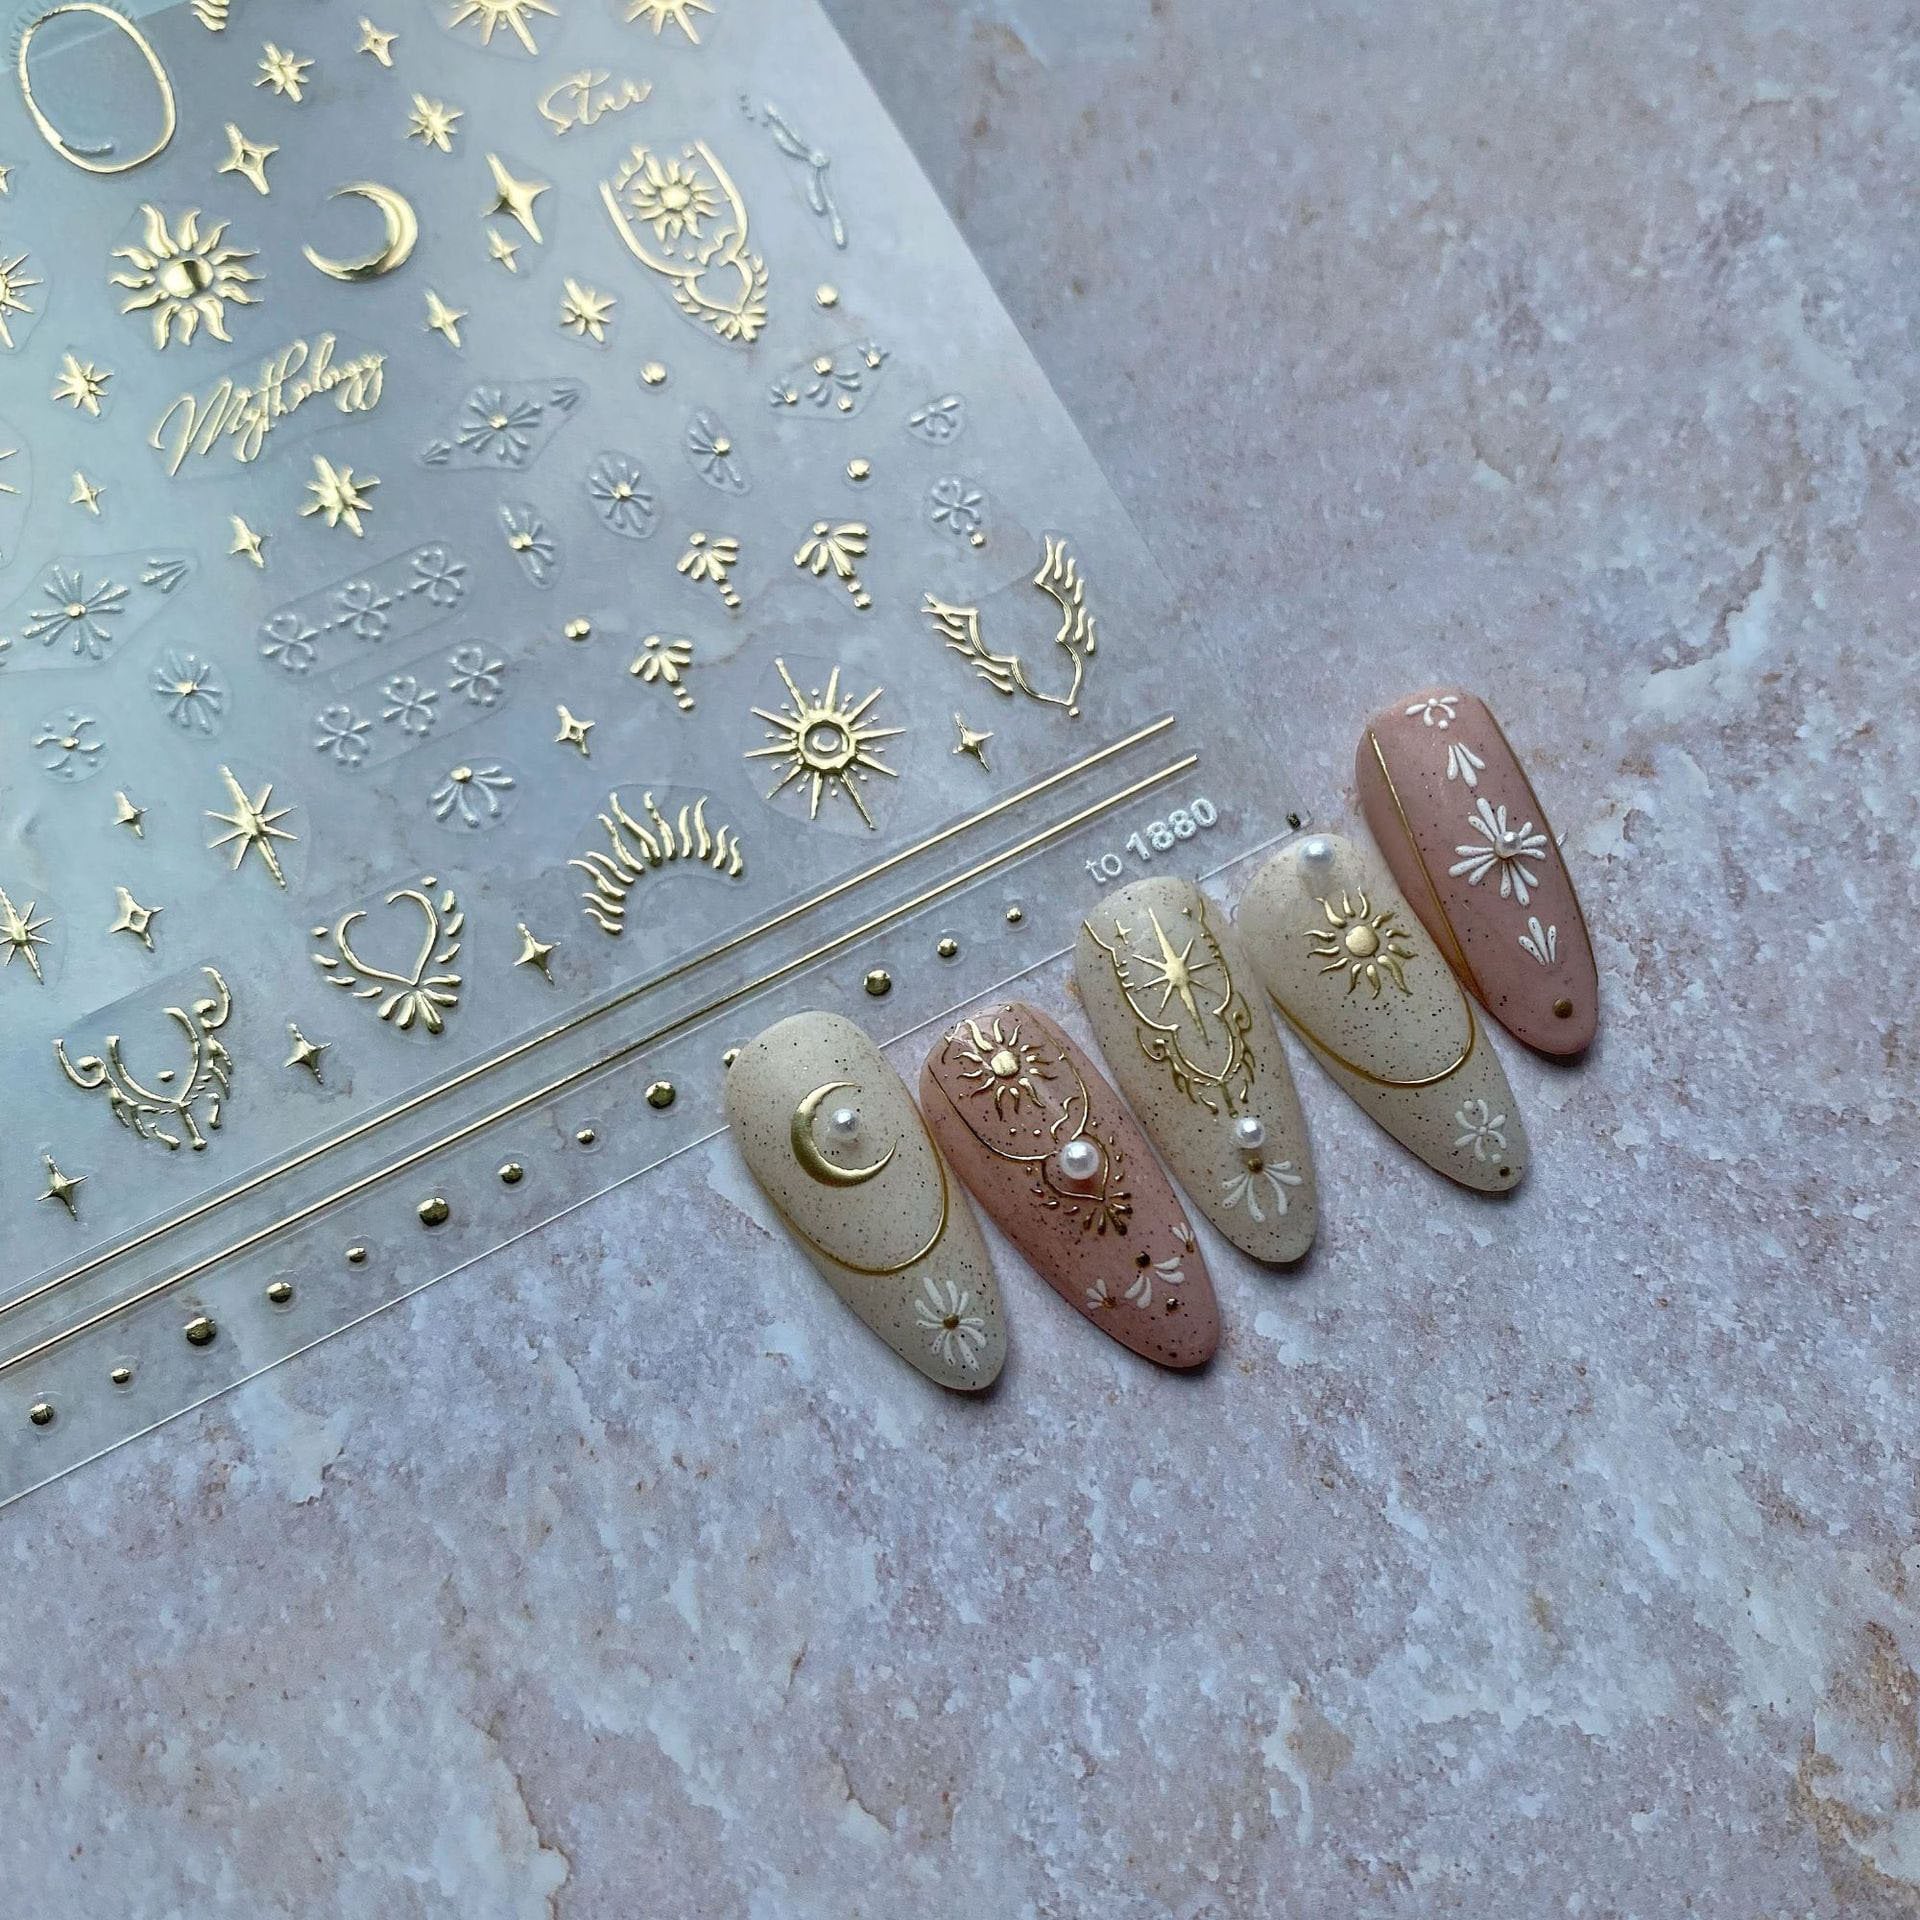 Gilding Crescent Moon Sun Star Nail sticker/ Silver Gold Supernatural Astrological 3D Embossed Stickers for nail art/ Mindful Nails